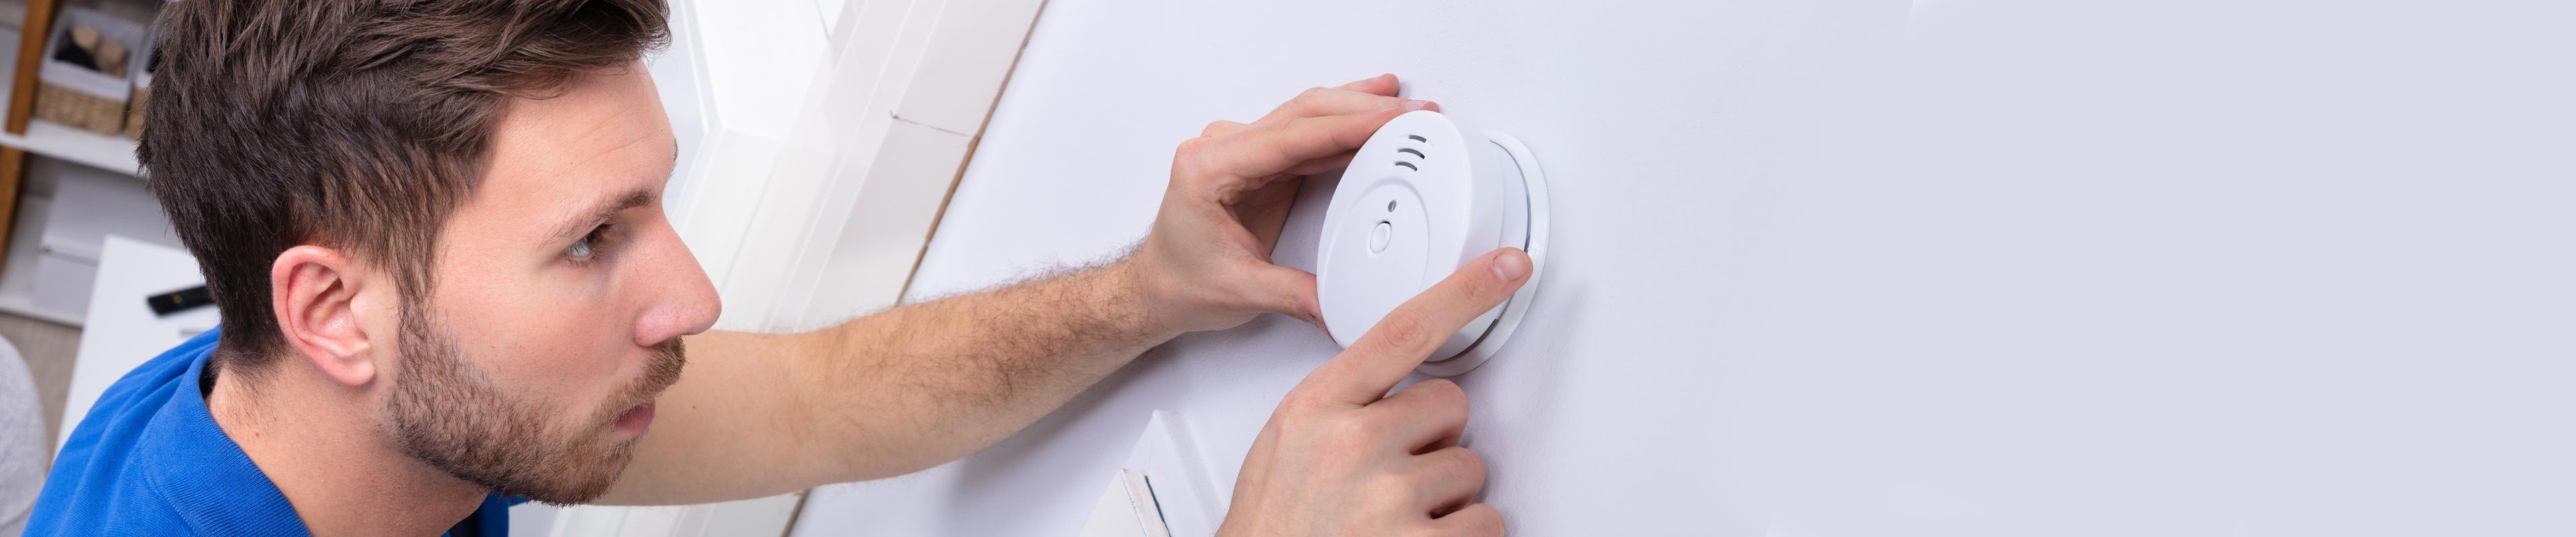 A white man with brown hair and closed-cropped beard wearing a blue shirt is installing a smoke detector on a white wall.